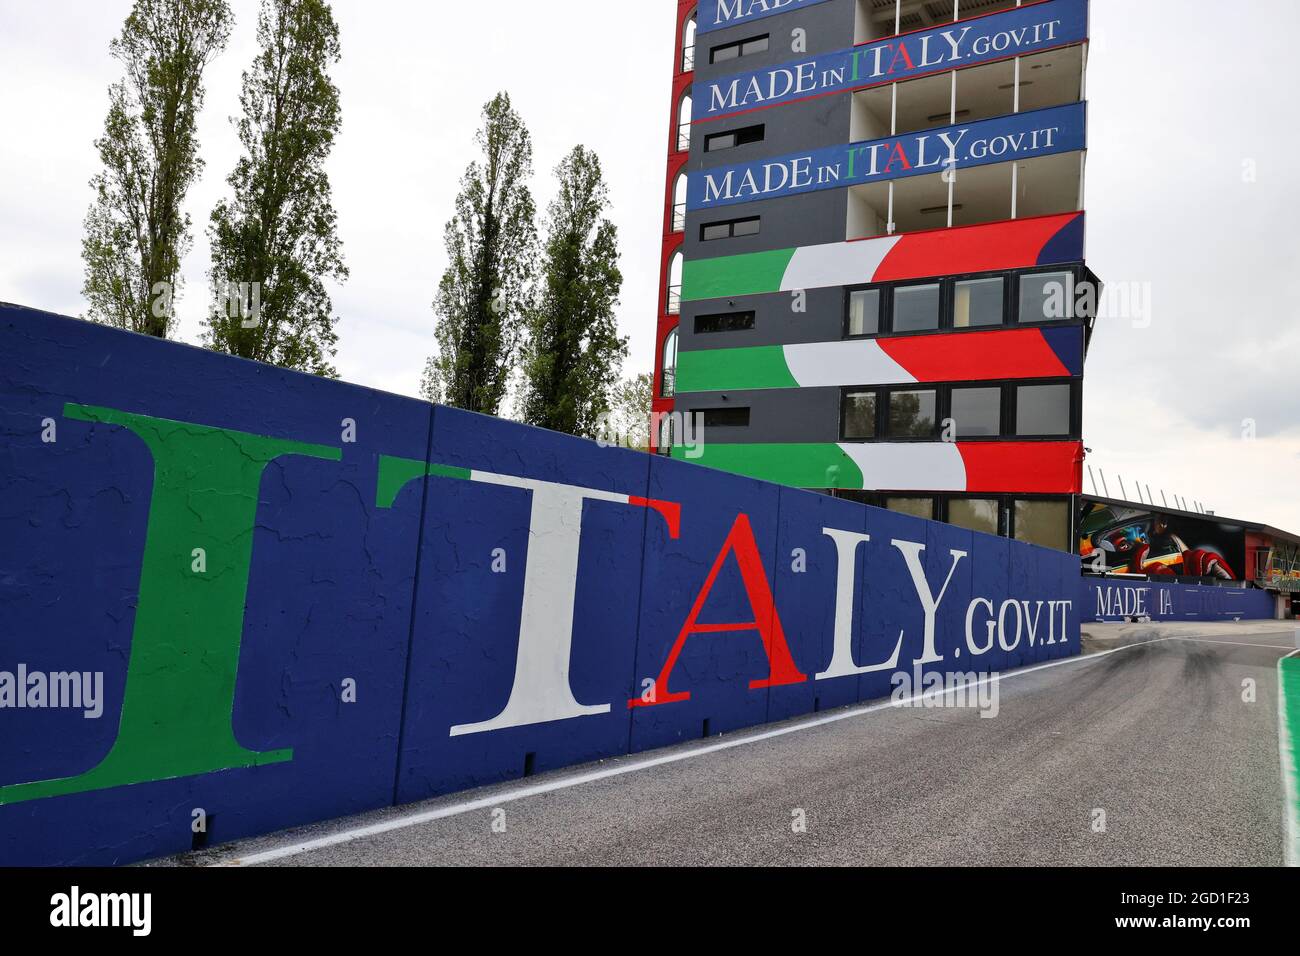 Circuit atmosphere - Made In Italy branding - race title sponsors. Emilia Romagna Grand Prix, Thursday 15th April 2021. Imola, Italy. Stock Photo